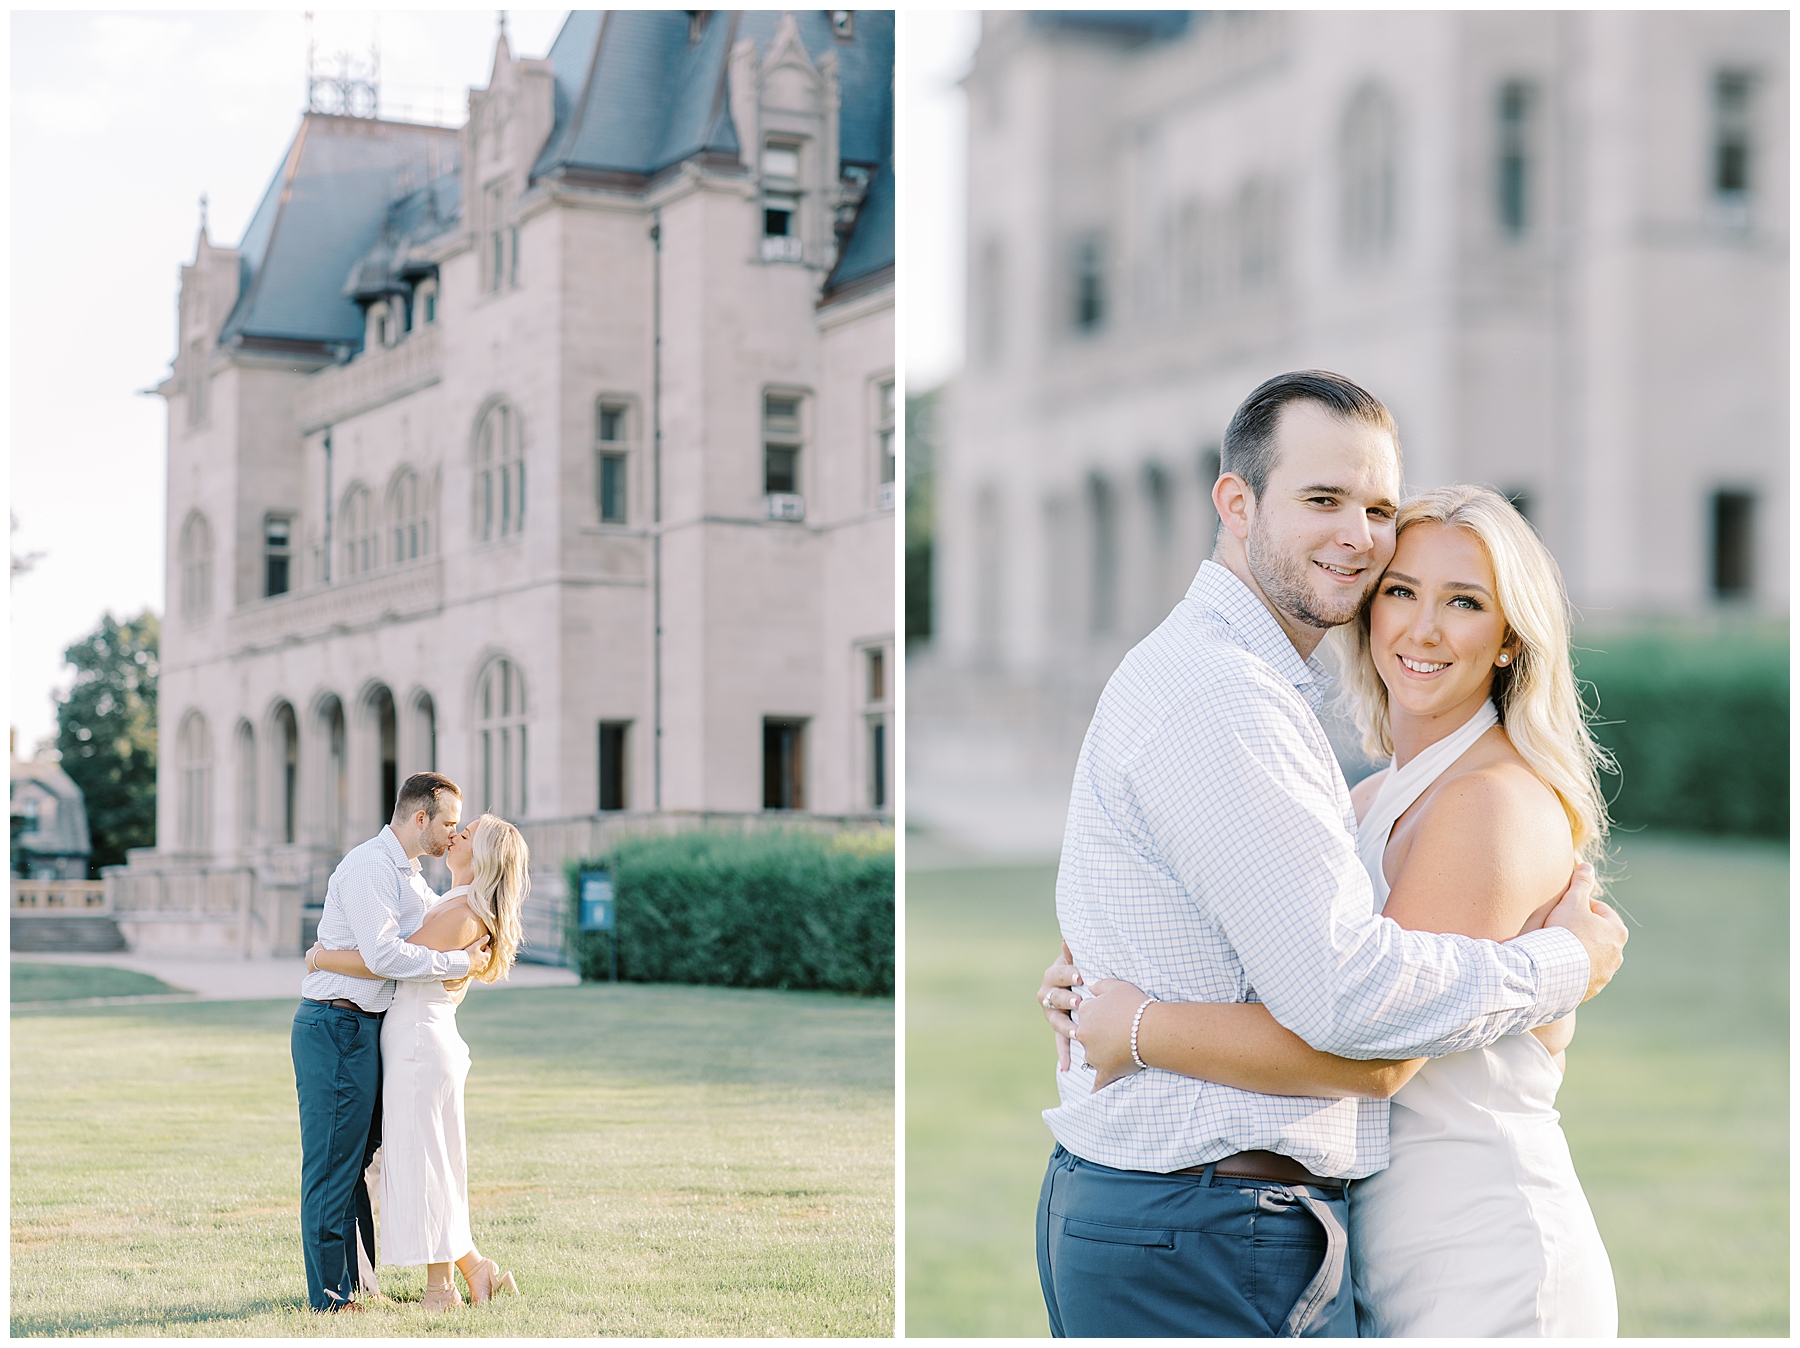 timeless engagement portraits at Ochre Court in Newport RI